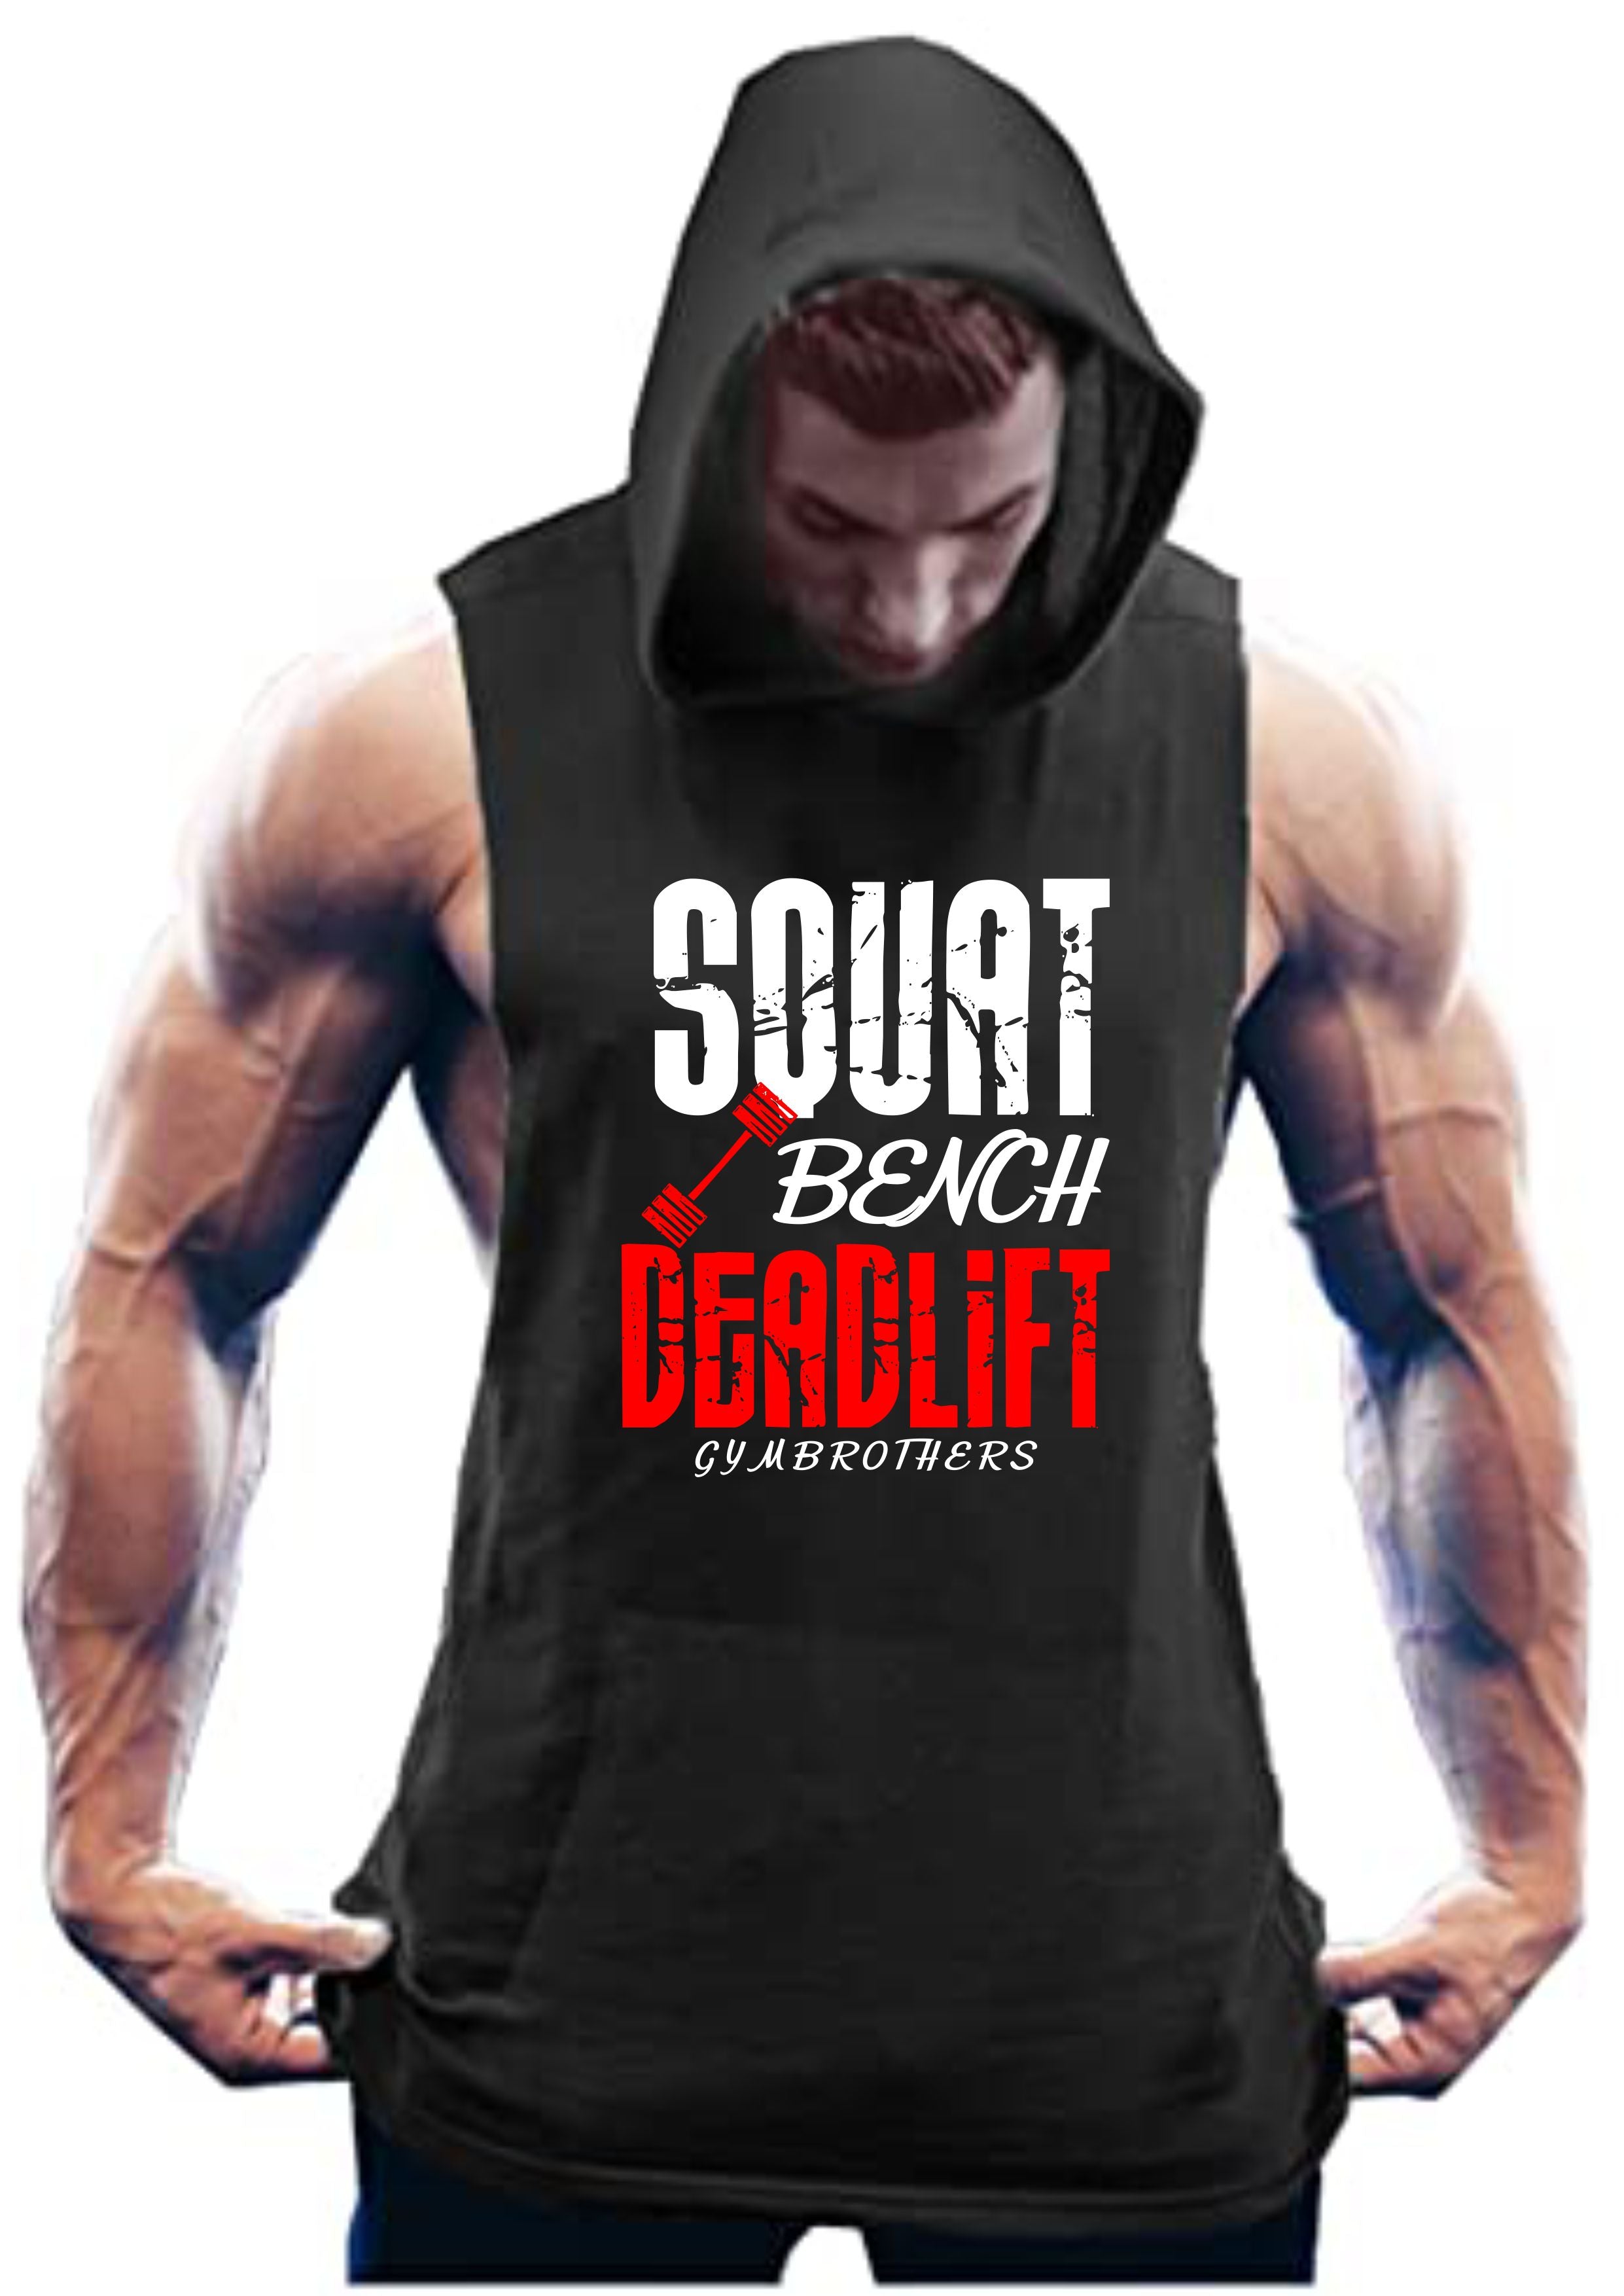 Gymbrothers Squat Bench Deadlift sleeveless gym hoodie for men